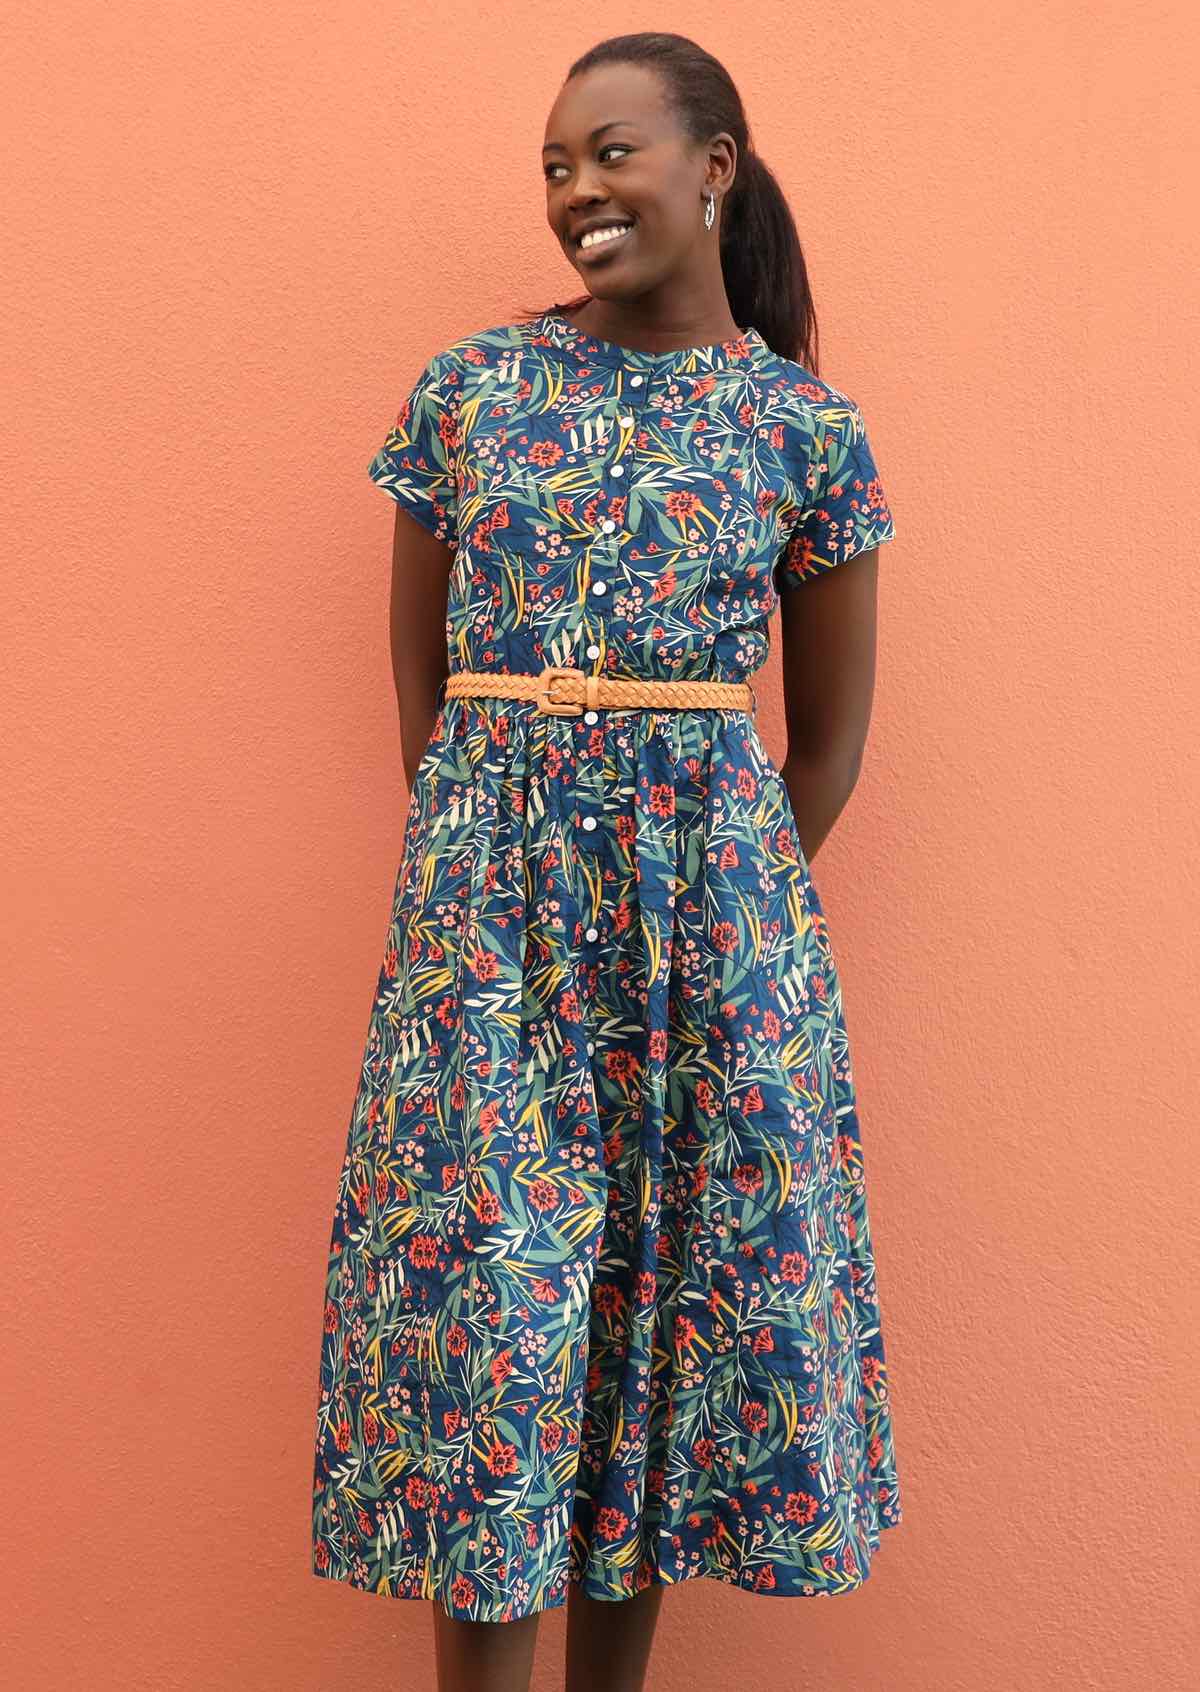 Model pairs 100% cotton dress with a belt and earrings. 